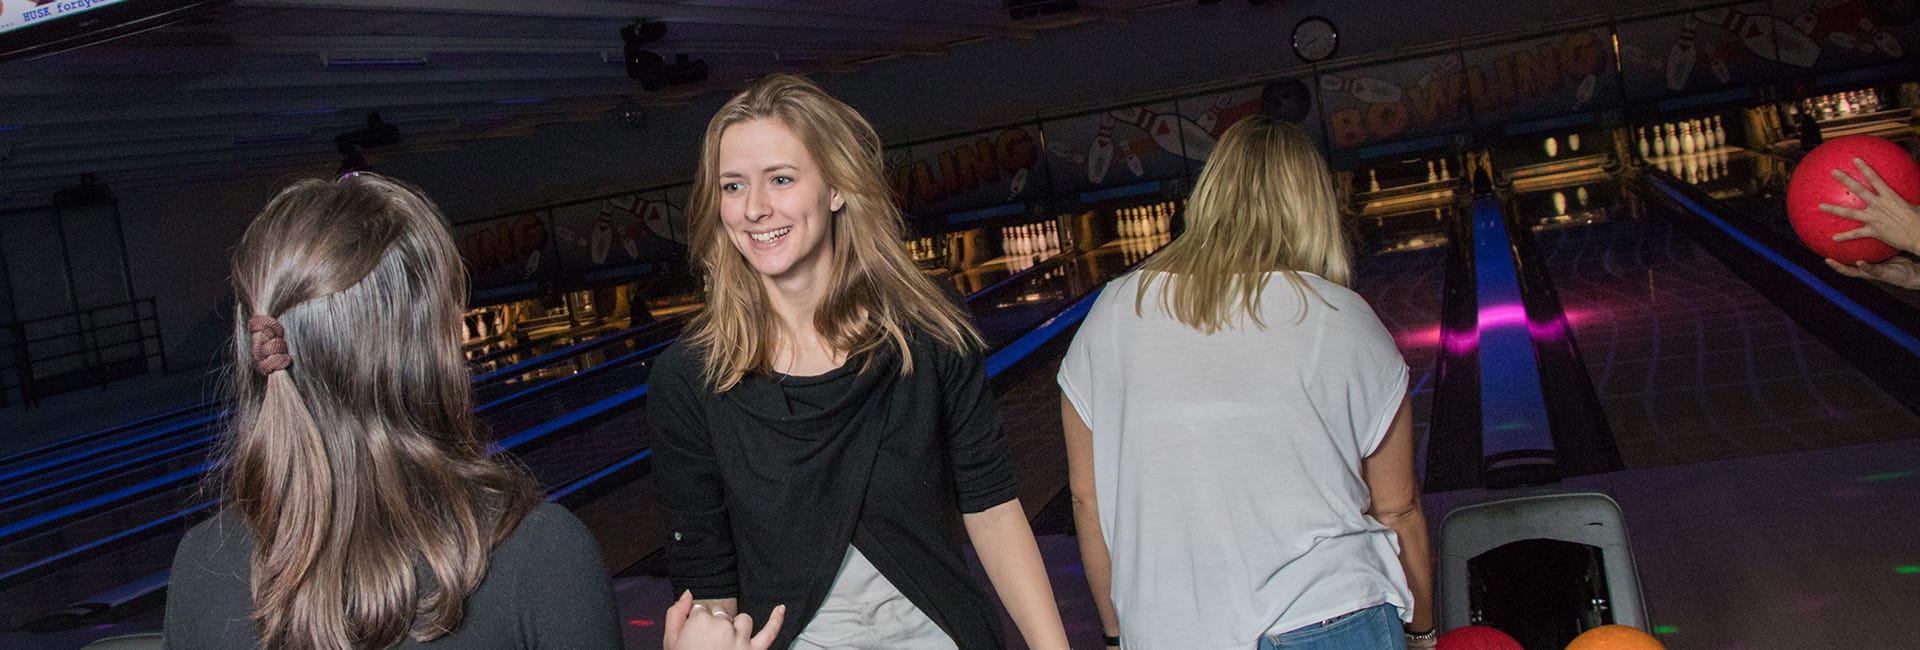 Bowling Roskilde